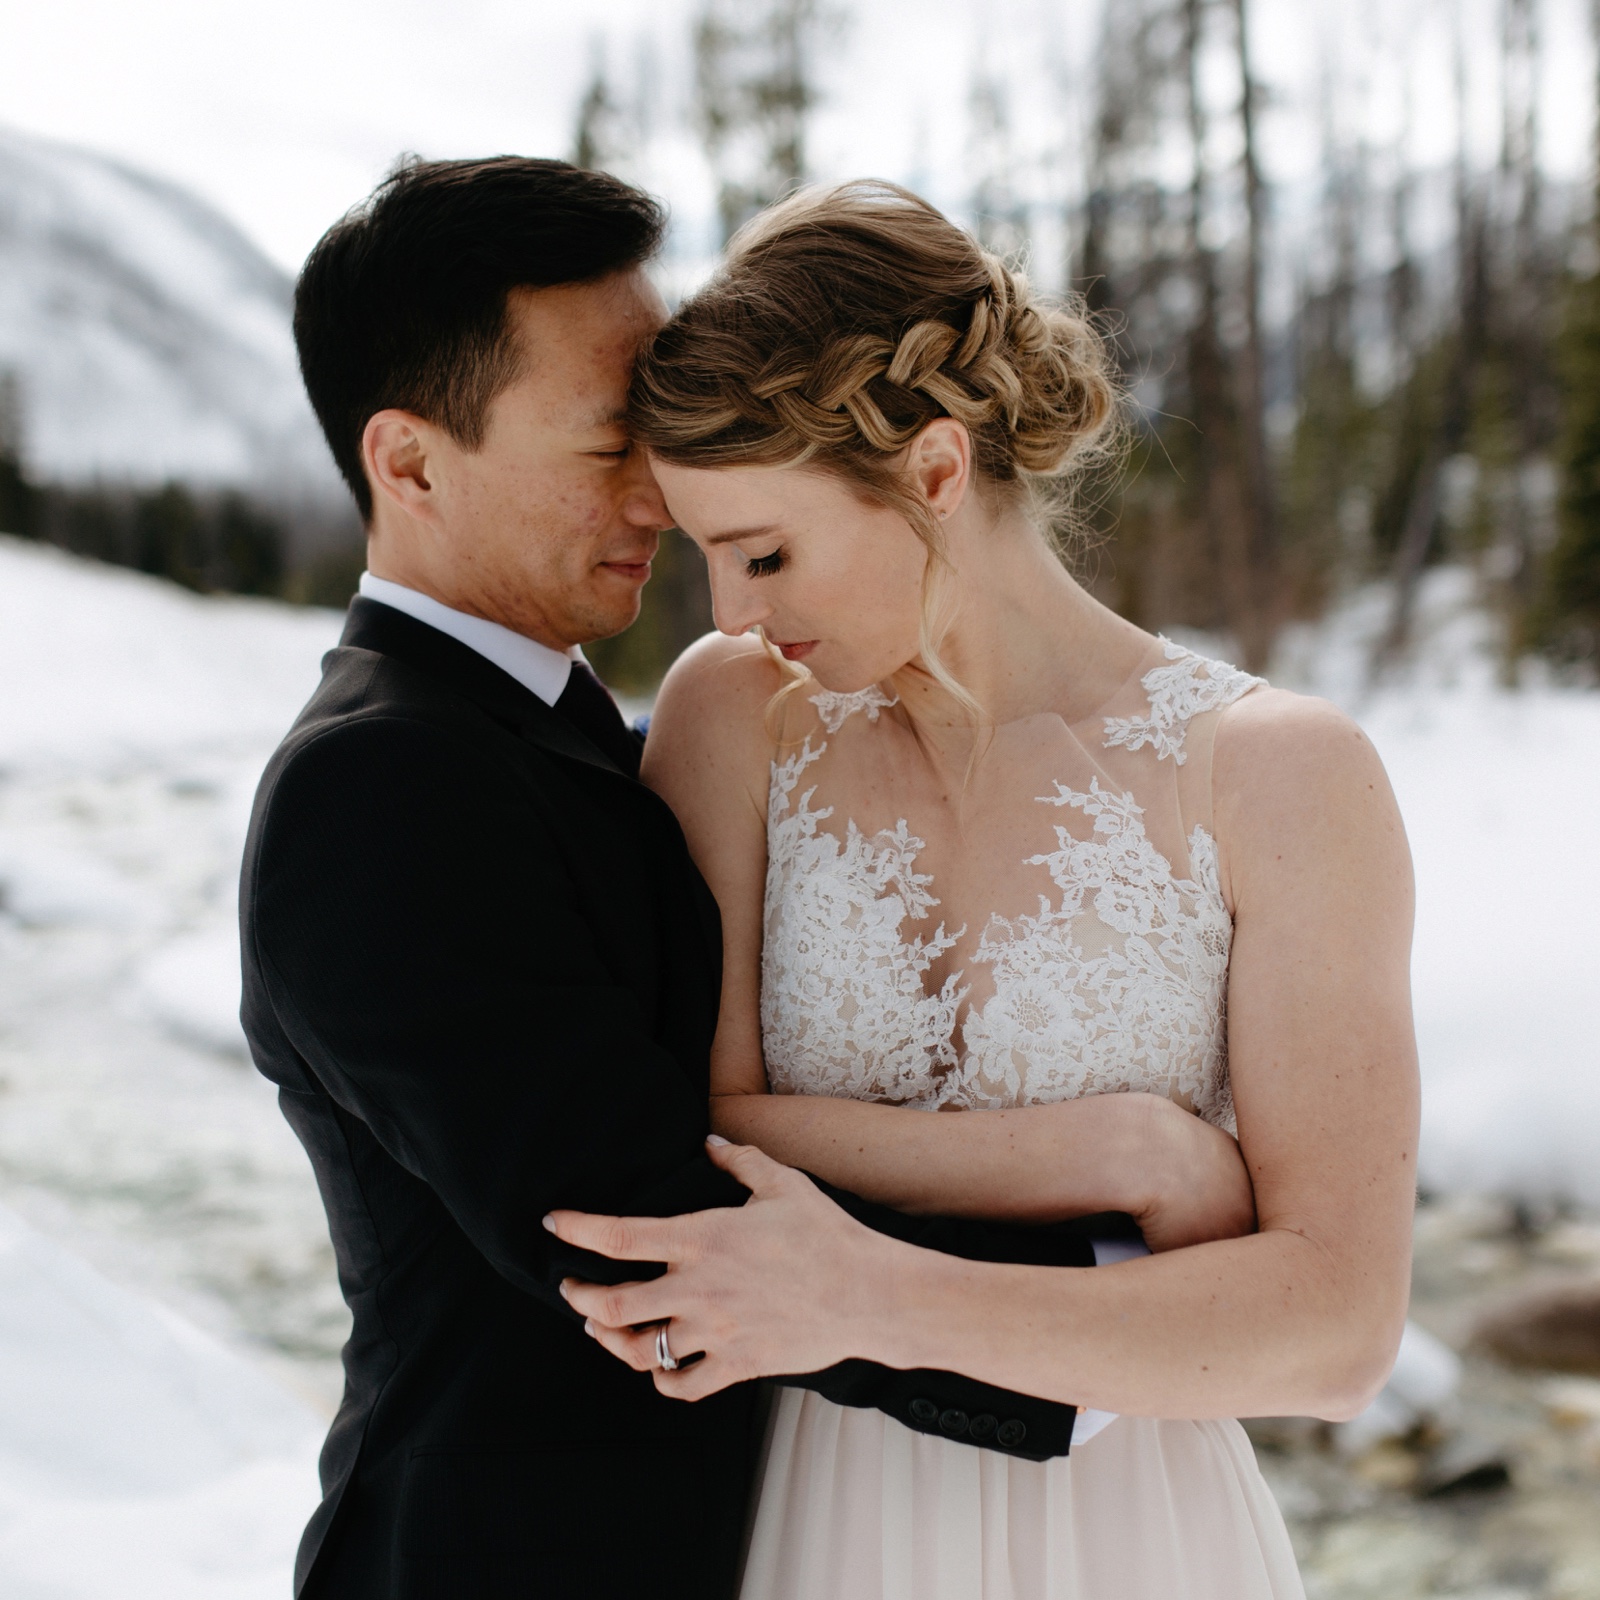 Intimate portraiture with a custom bridal skirt at Marble Canyon in Kootenay National Park